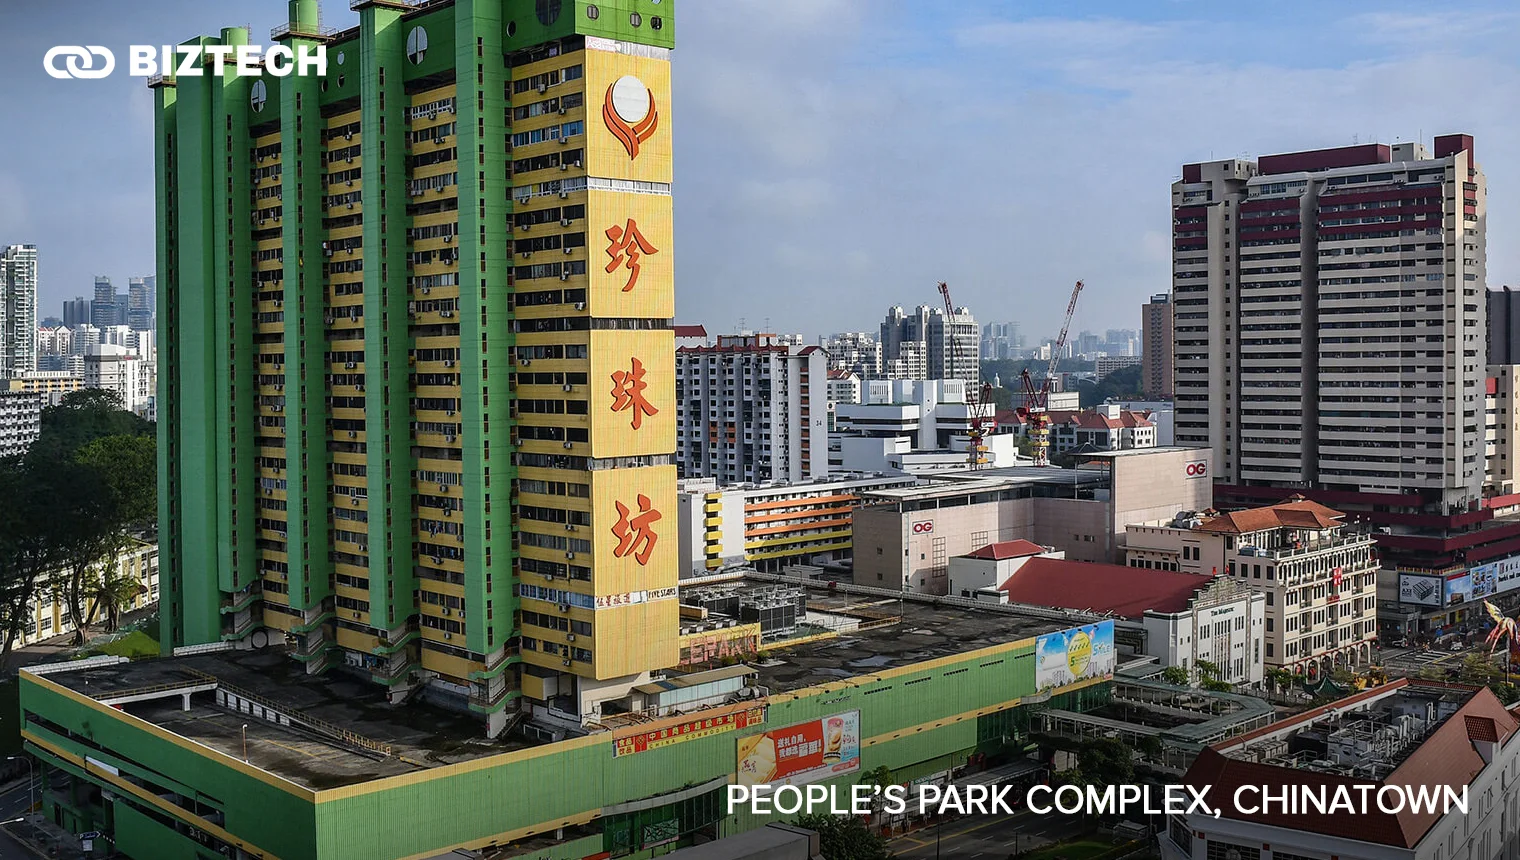 People’s Park Complex, Chinatown